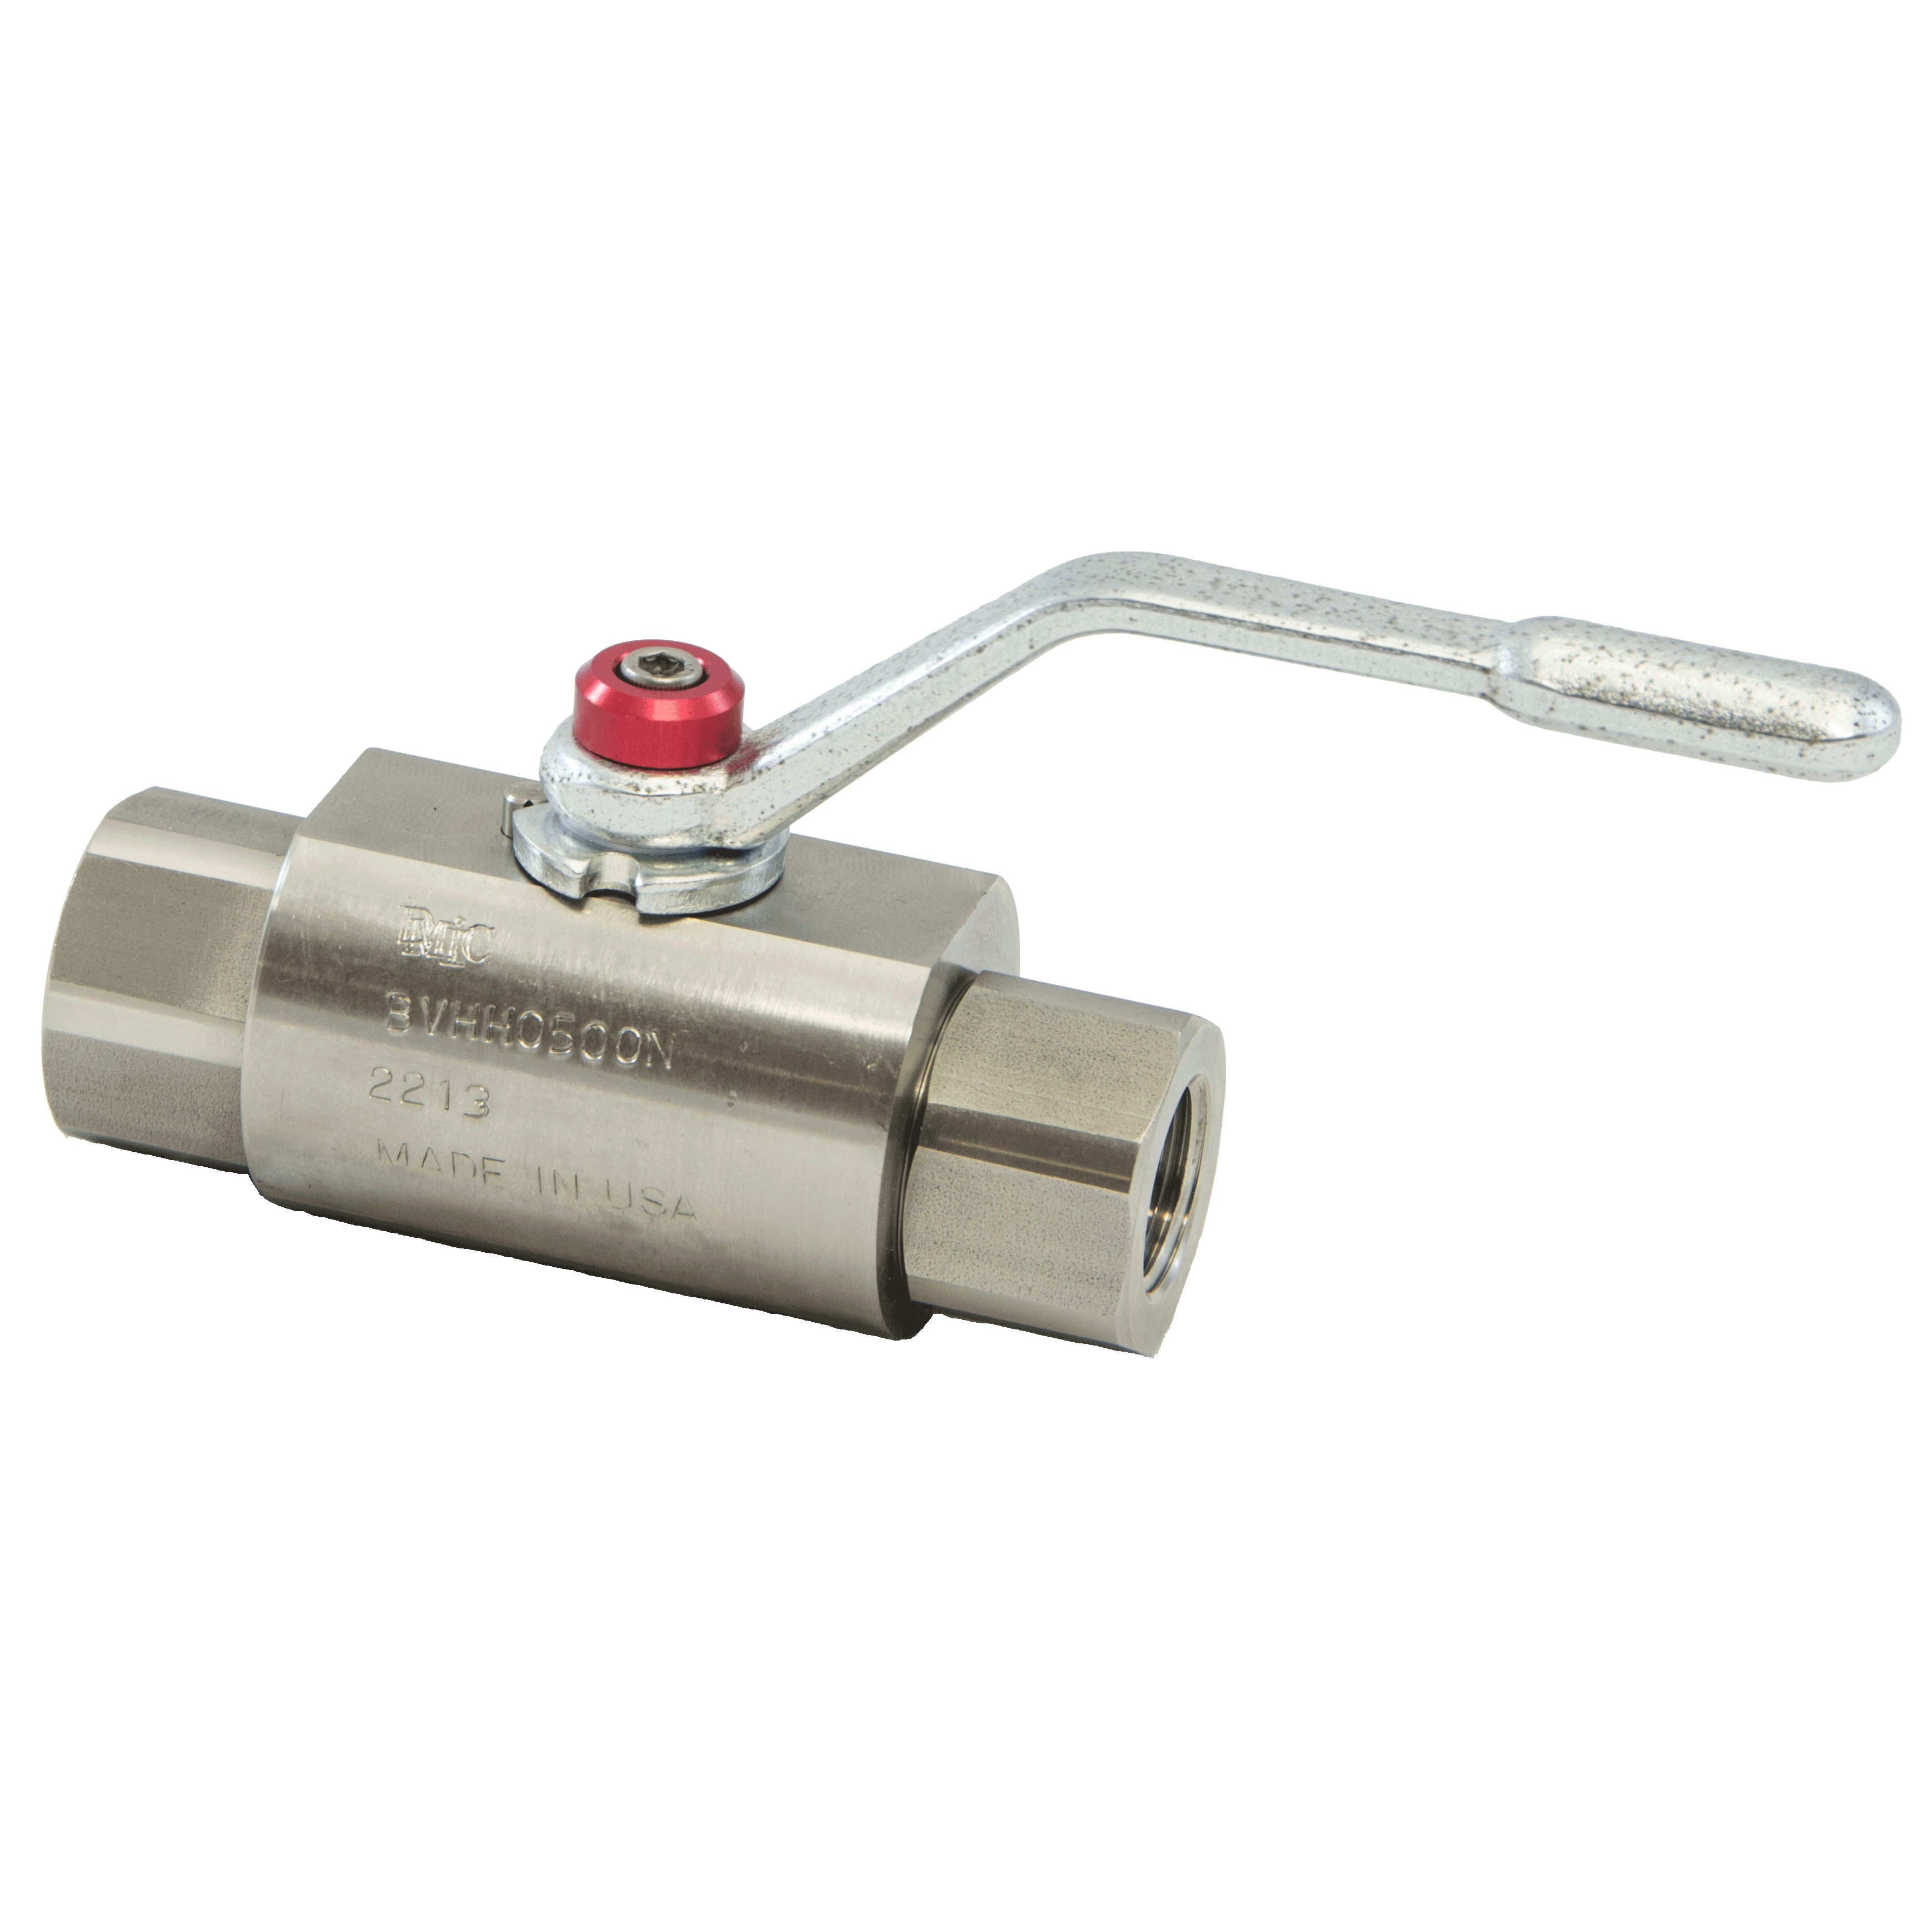 BVHH-0500S-2211 : DMIC Super High Pressure Ball Valve, #8 SAE (1/2), 316 Stainless Steel, 10000psi, Two-Way